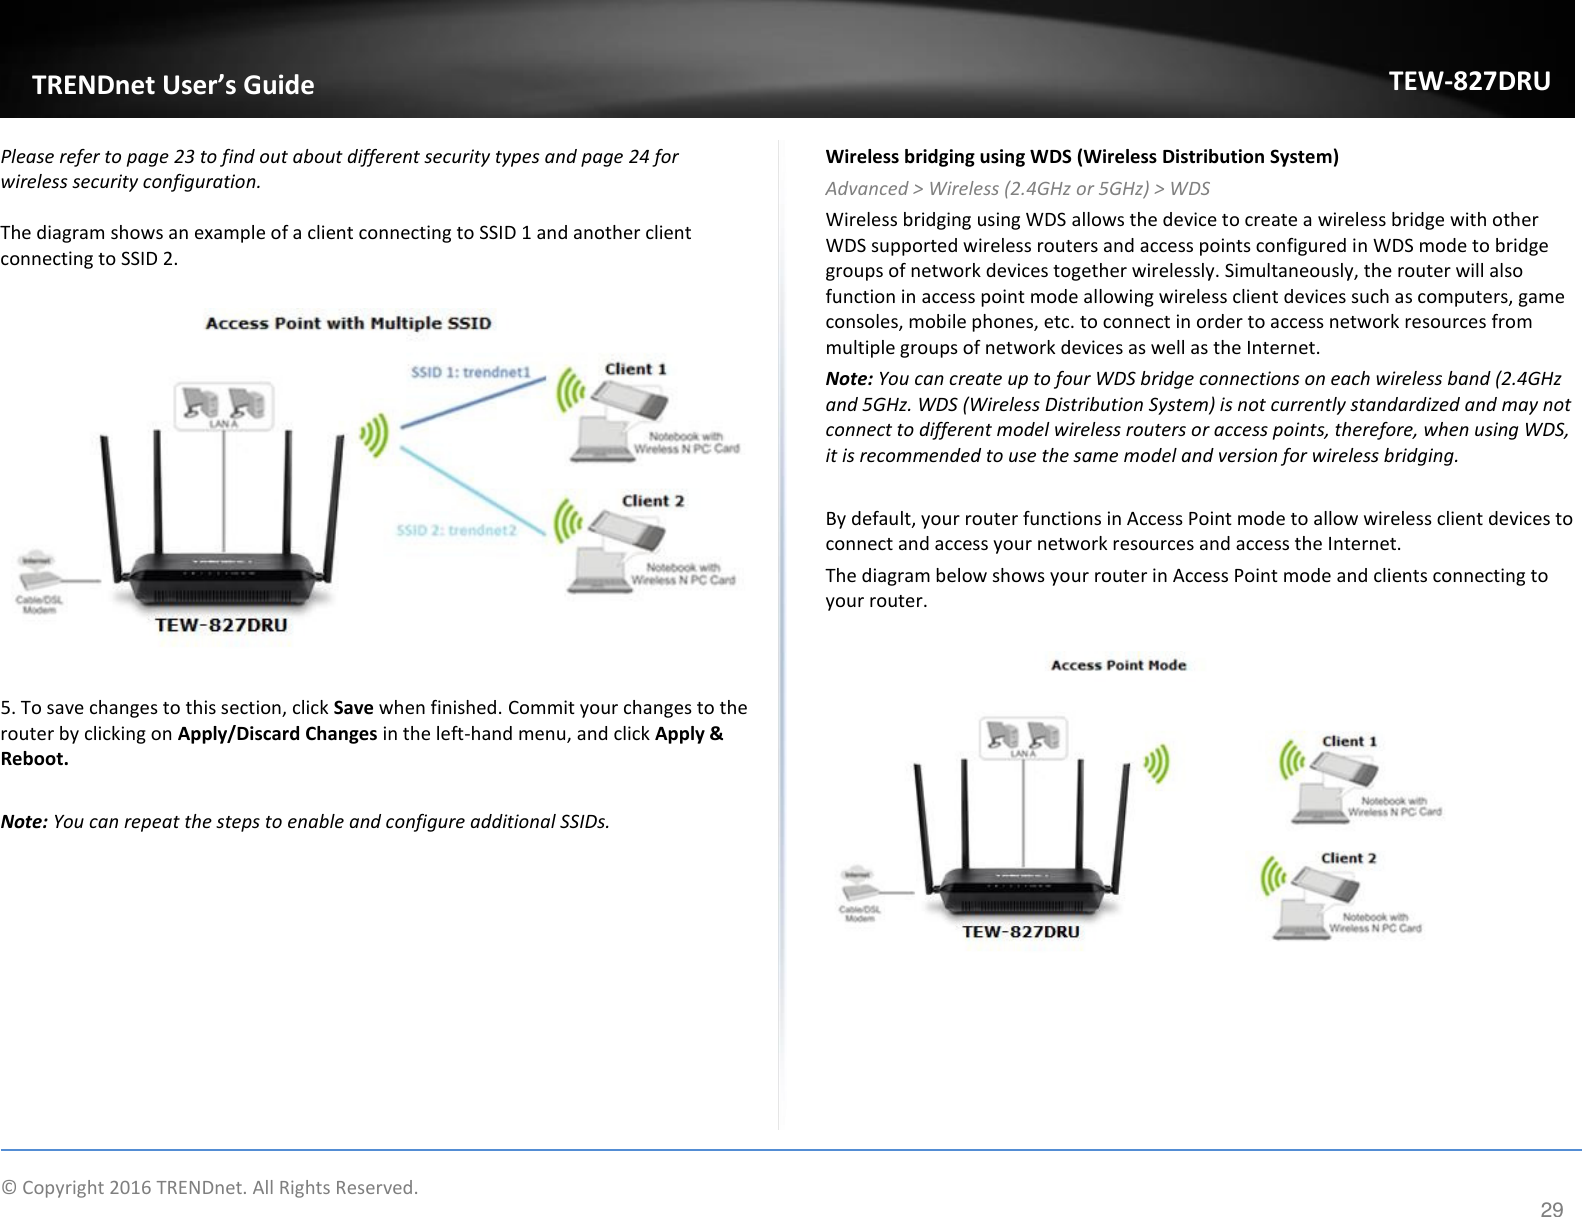                  © Copyright 2016 TRENDnet. All Rights Reserved.       TRENDet User’s Guide TEW-827DRU 29 Please refer to page 23 to find out about different security types and page 24 for wireless security configuration.  The diagram shows an example of a client connecting to SSID 1 and another client connecting to SSID 2.    5. To save changes to this section, click Save when finished. Commit your changes to the router by clicking on Apply/Discard Changes in the left-hand menu, and click Apply &amp; Reboot.  Note: You can repeat the steps to enable and configure additional SSIDs. Wireless bridging using WDS (Wireless Distribution System) Advanced &gt; Wireless (2.4GHz or 5GHz) &gt; WDS Wireless bridging using WDS allows the device to create a wireless bridge with other WDS supported wireless routers and access points configured in WDS mode to bridge groups of network devices together wirelessly. Simultaneously, the router will also function in access point mode allowing wireless client devices such as computers, game consoles, mobile phones, etc. to connect in order to access network resources from multiple groups of network devices as well as the Internet.  Note: You can create up to four WDS bridge connections on each wireless band (2.4GHz and 5GHz. WDS (Wireless Distribution System) is not currently standardized and may not connect to different model wireless routers or access points, therefore, when using WDS, it is recommended to use the same model and version for wireless bridging.  By default, your router functions in Access Point mode to allow wireless client devices to connect and access your network resources and access the Internet. The diagram below shows your router in Access Point mode and clients connecting to your router.        